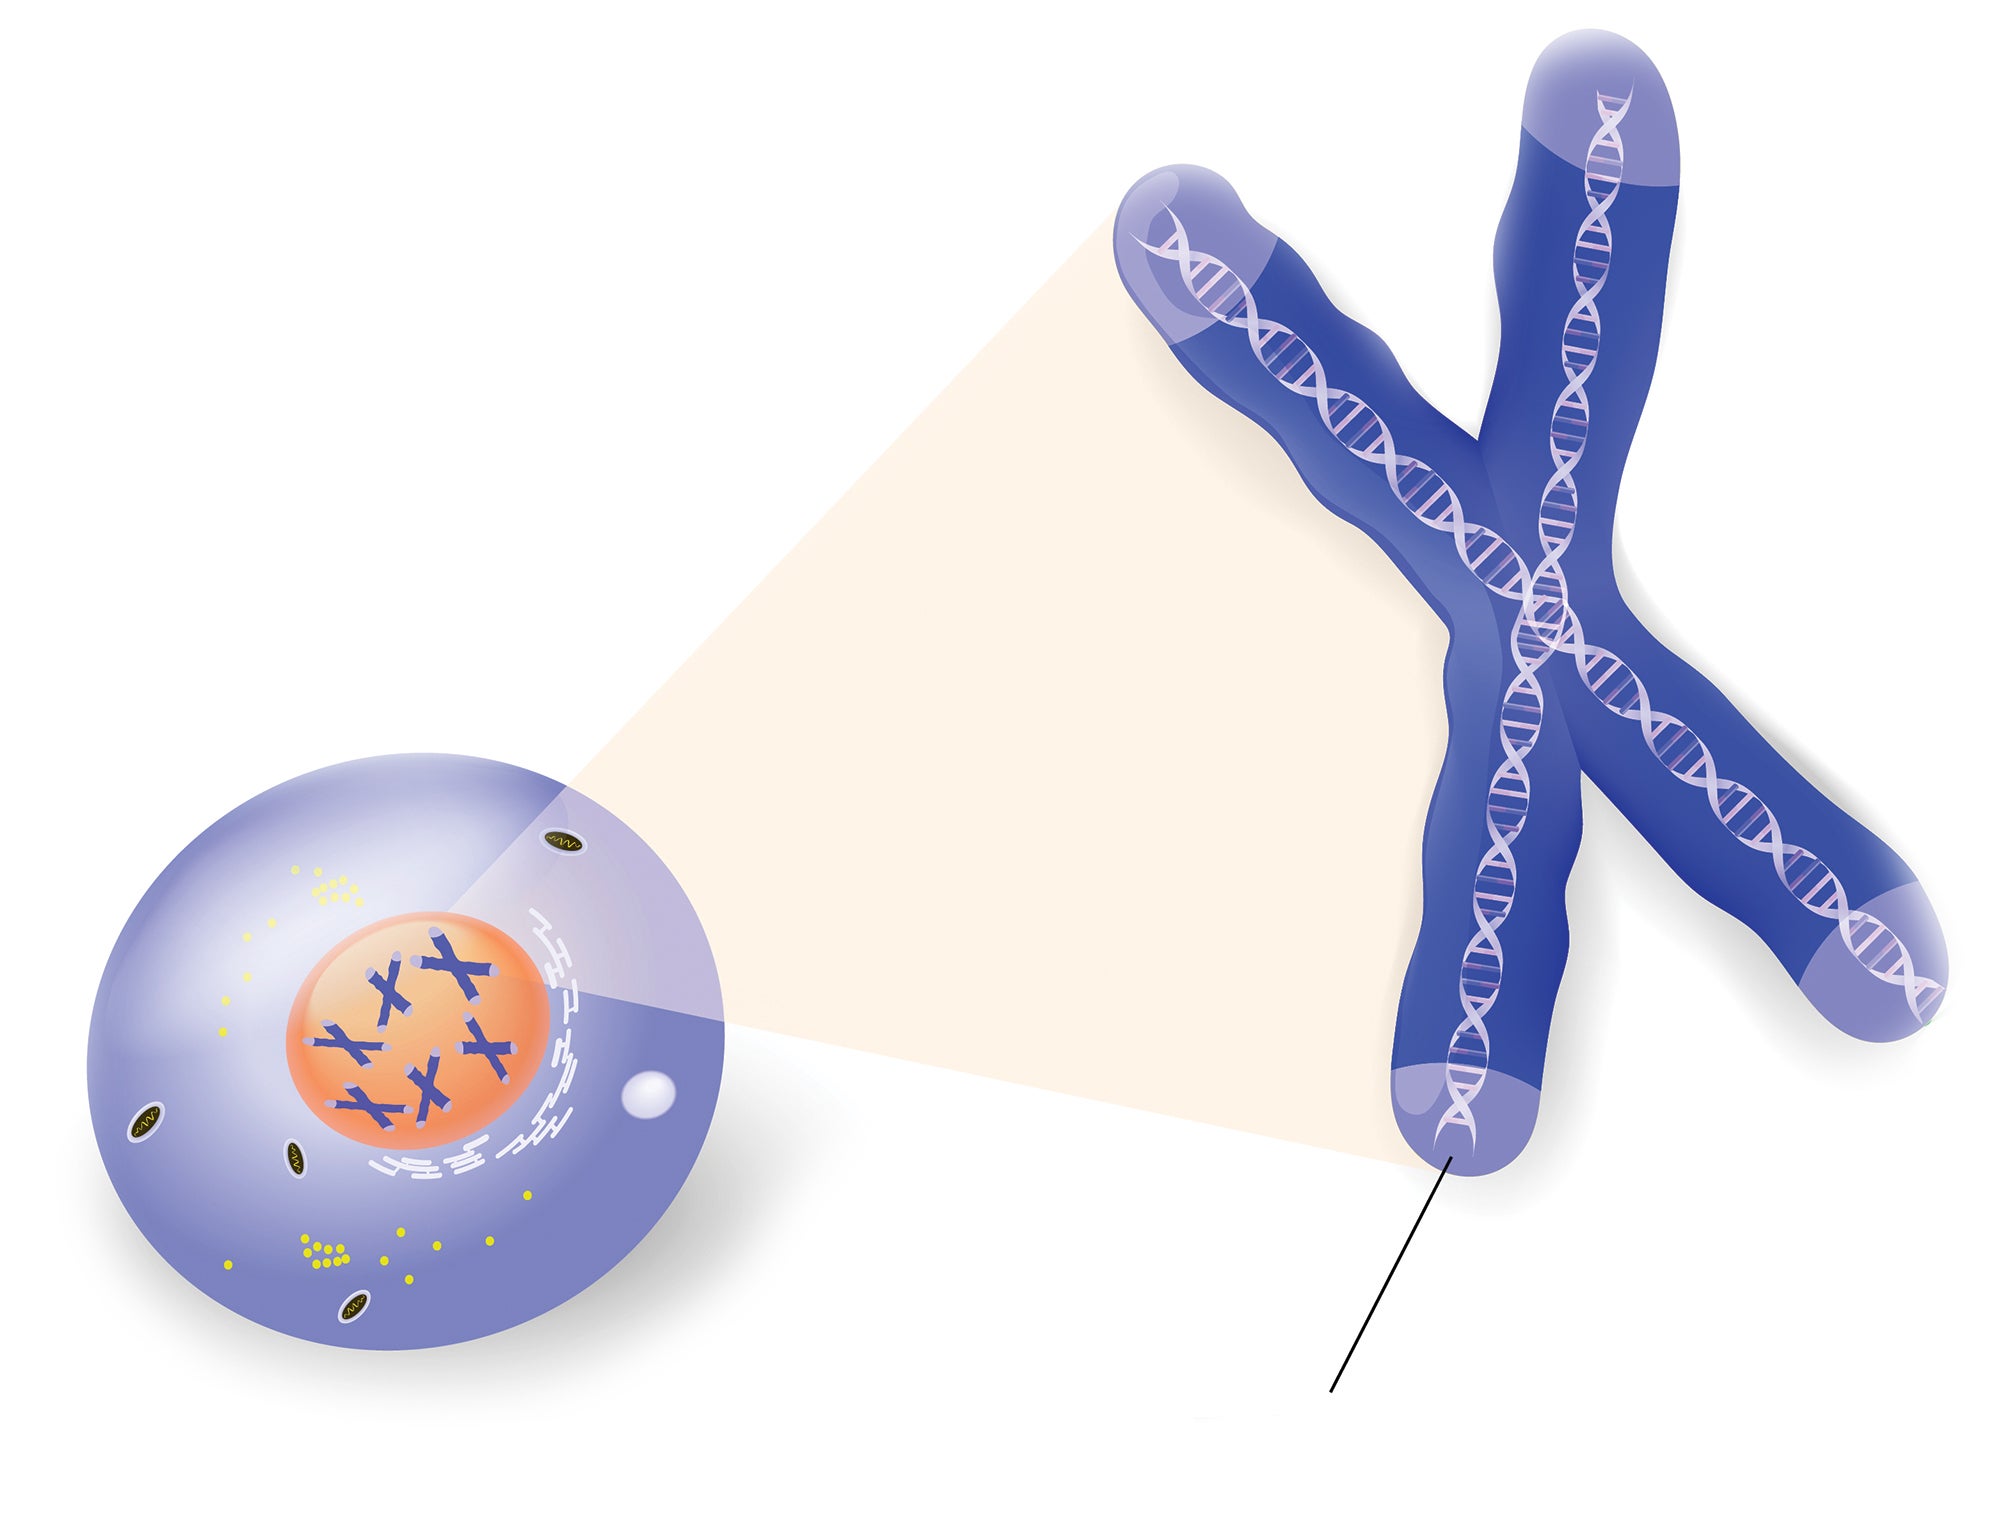 Illustration of telomeres in a cell nucleus.